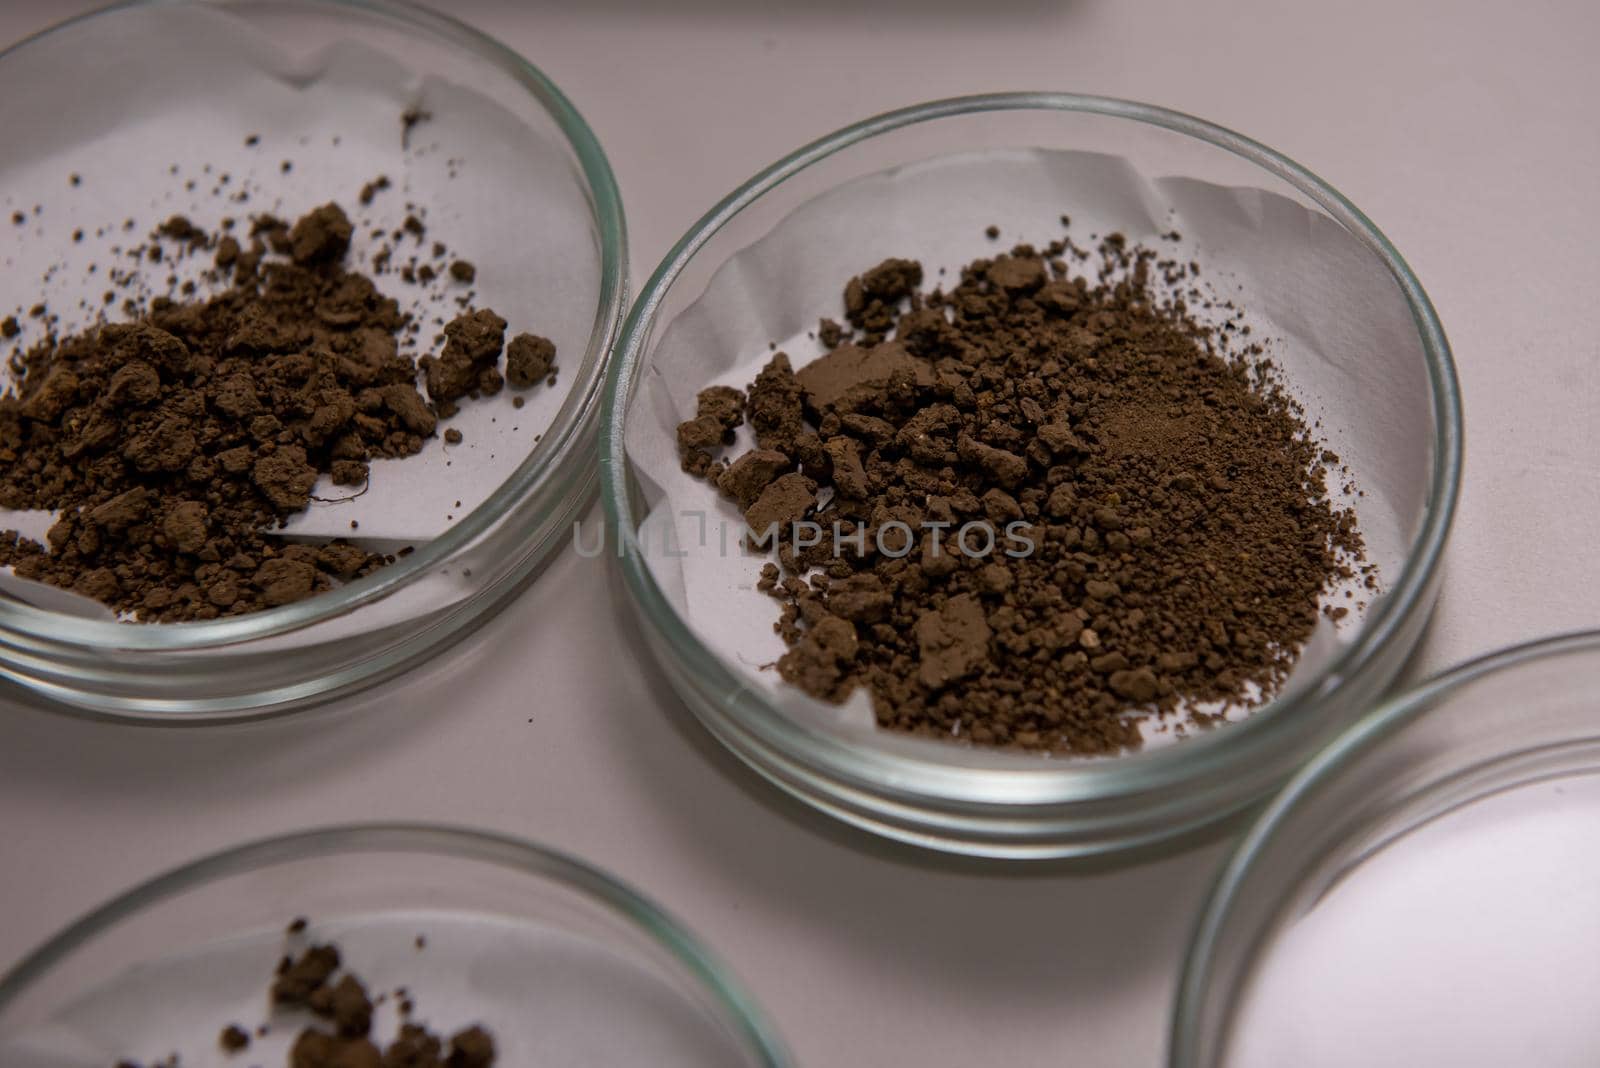 Glassware with soil samples. Laboratory research. Close-up.